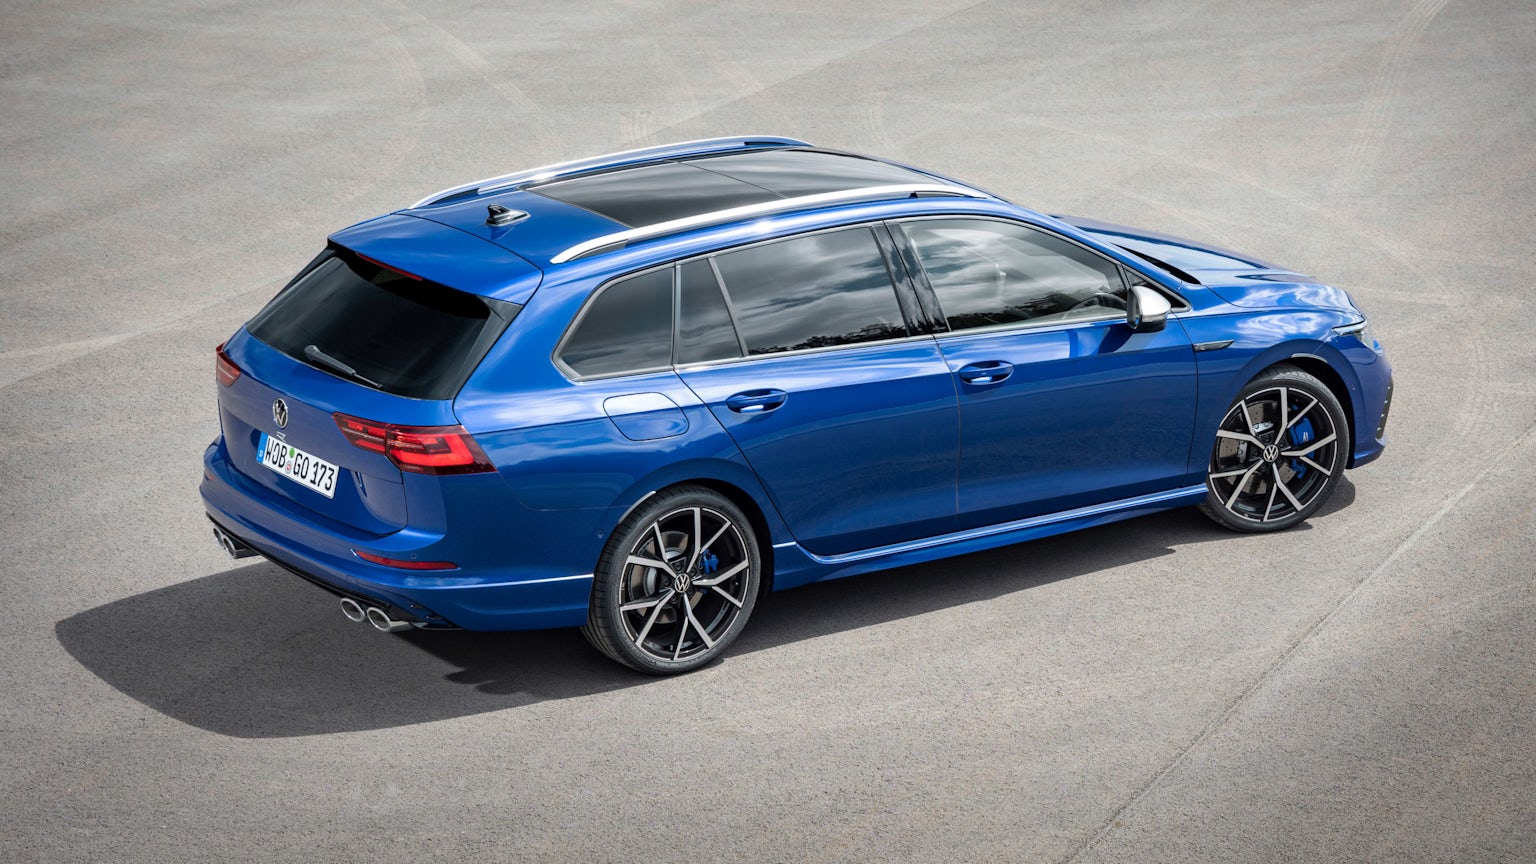 New Volkswagen Golf R Estate revealed price, specs and release date